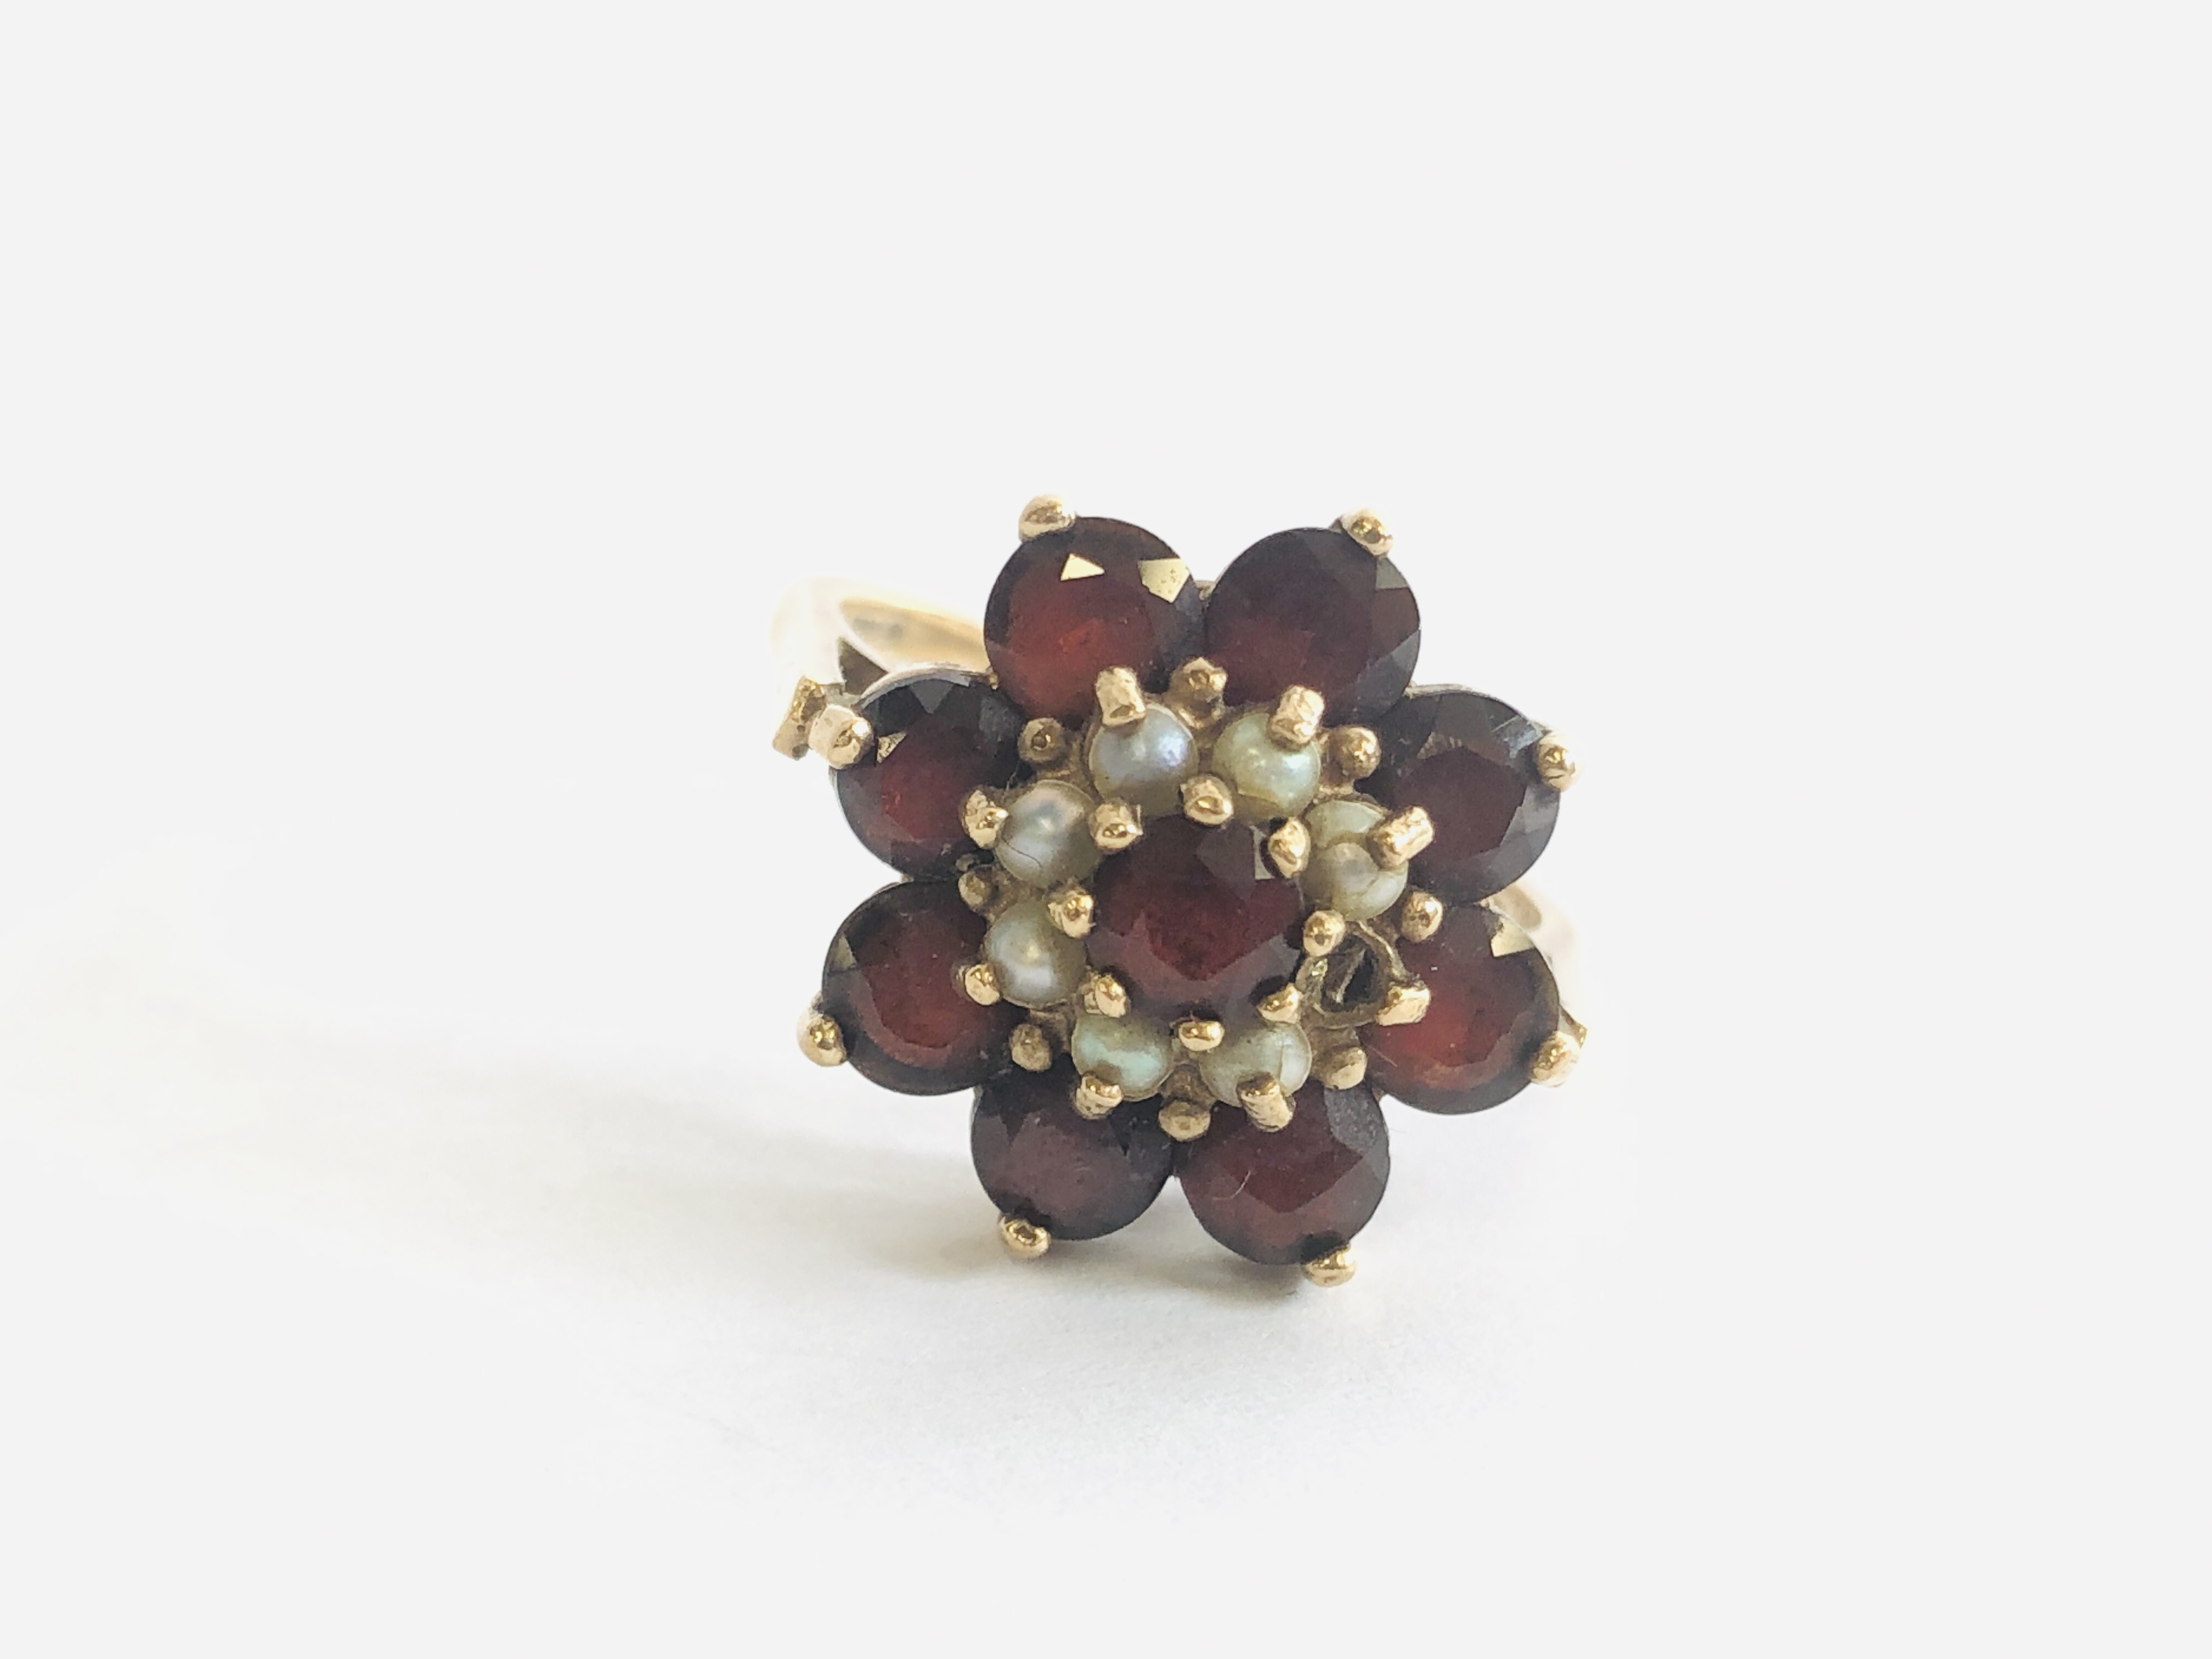 9CT GOLD LADIES RING, FLOWER HEAD DESIGN SET WITH GARNETS AND SEED PEARLS (1 SEED PEARL MISSING). - Image 2 of 9